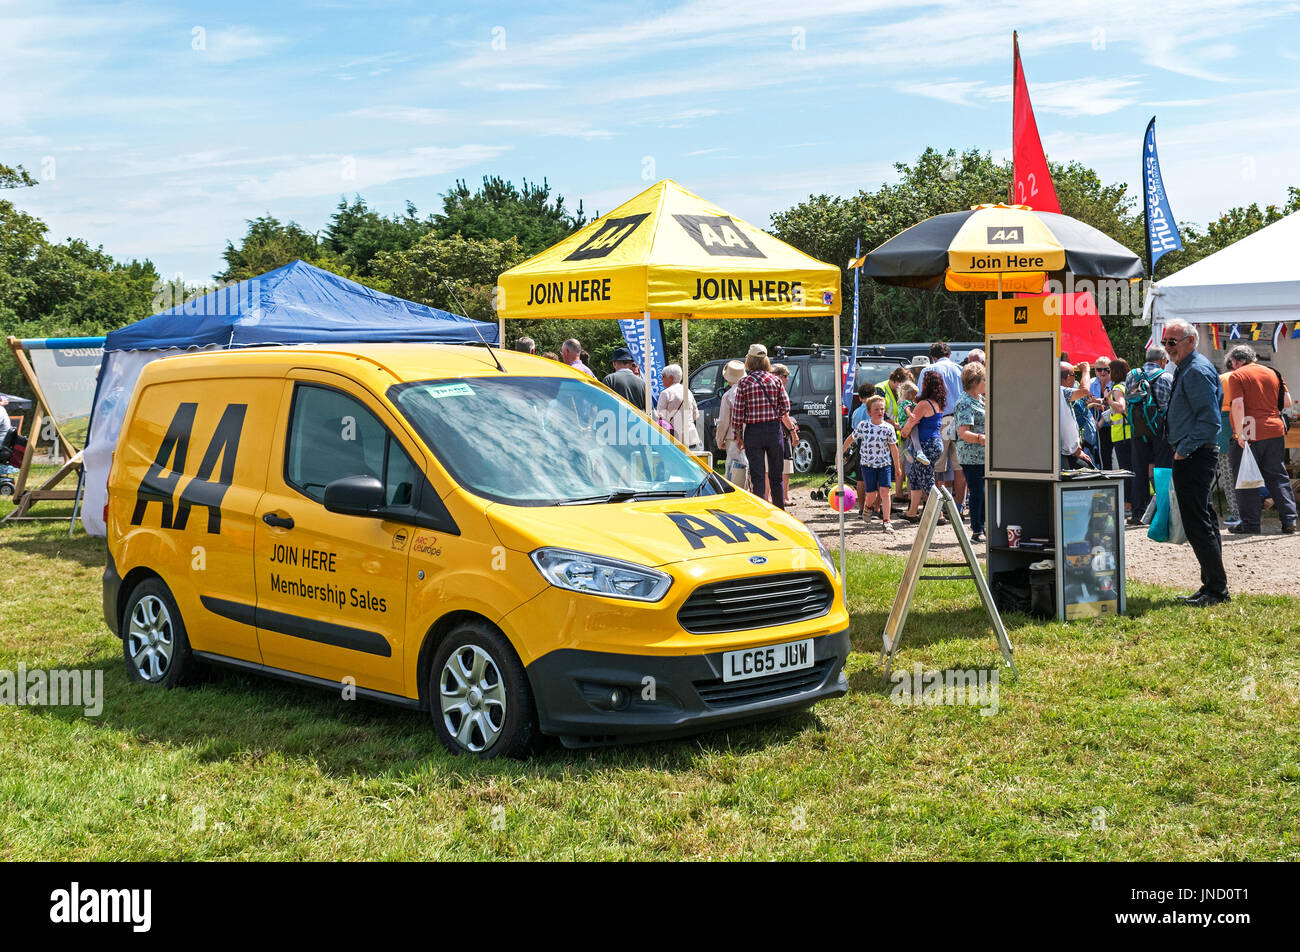 AA sales stand at a country show in cornwall, uk Stock Photo